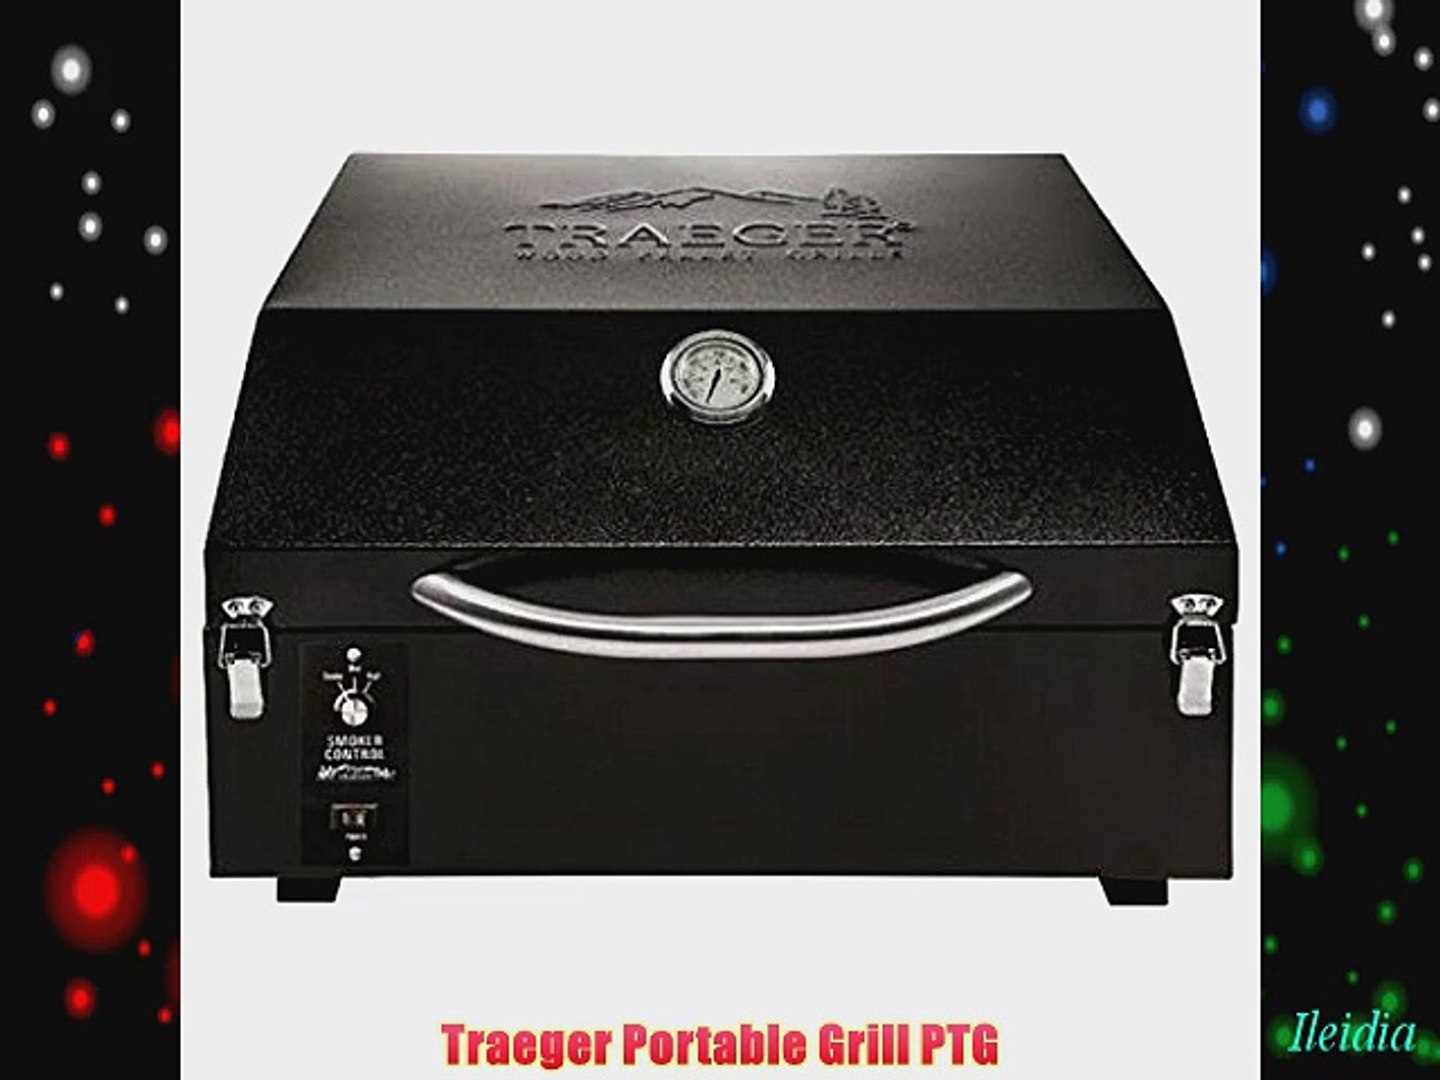 Traeger Portable Grill PTG - video Dailymotion